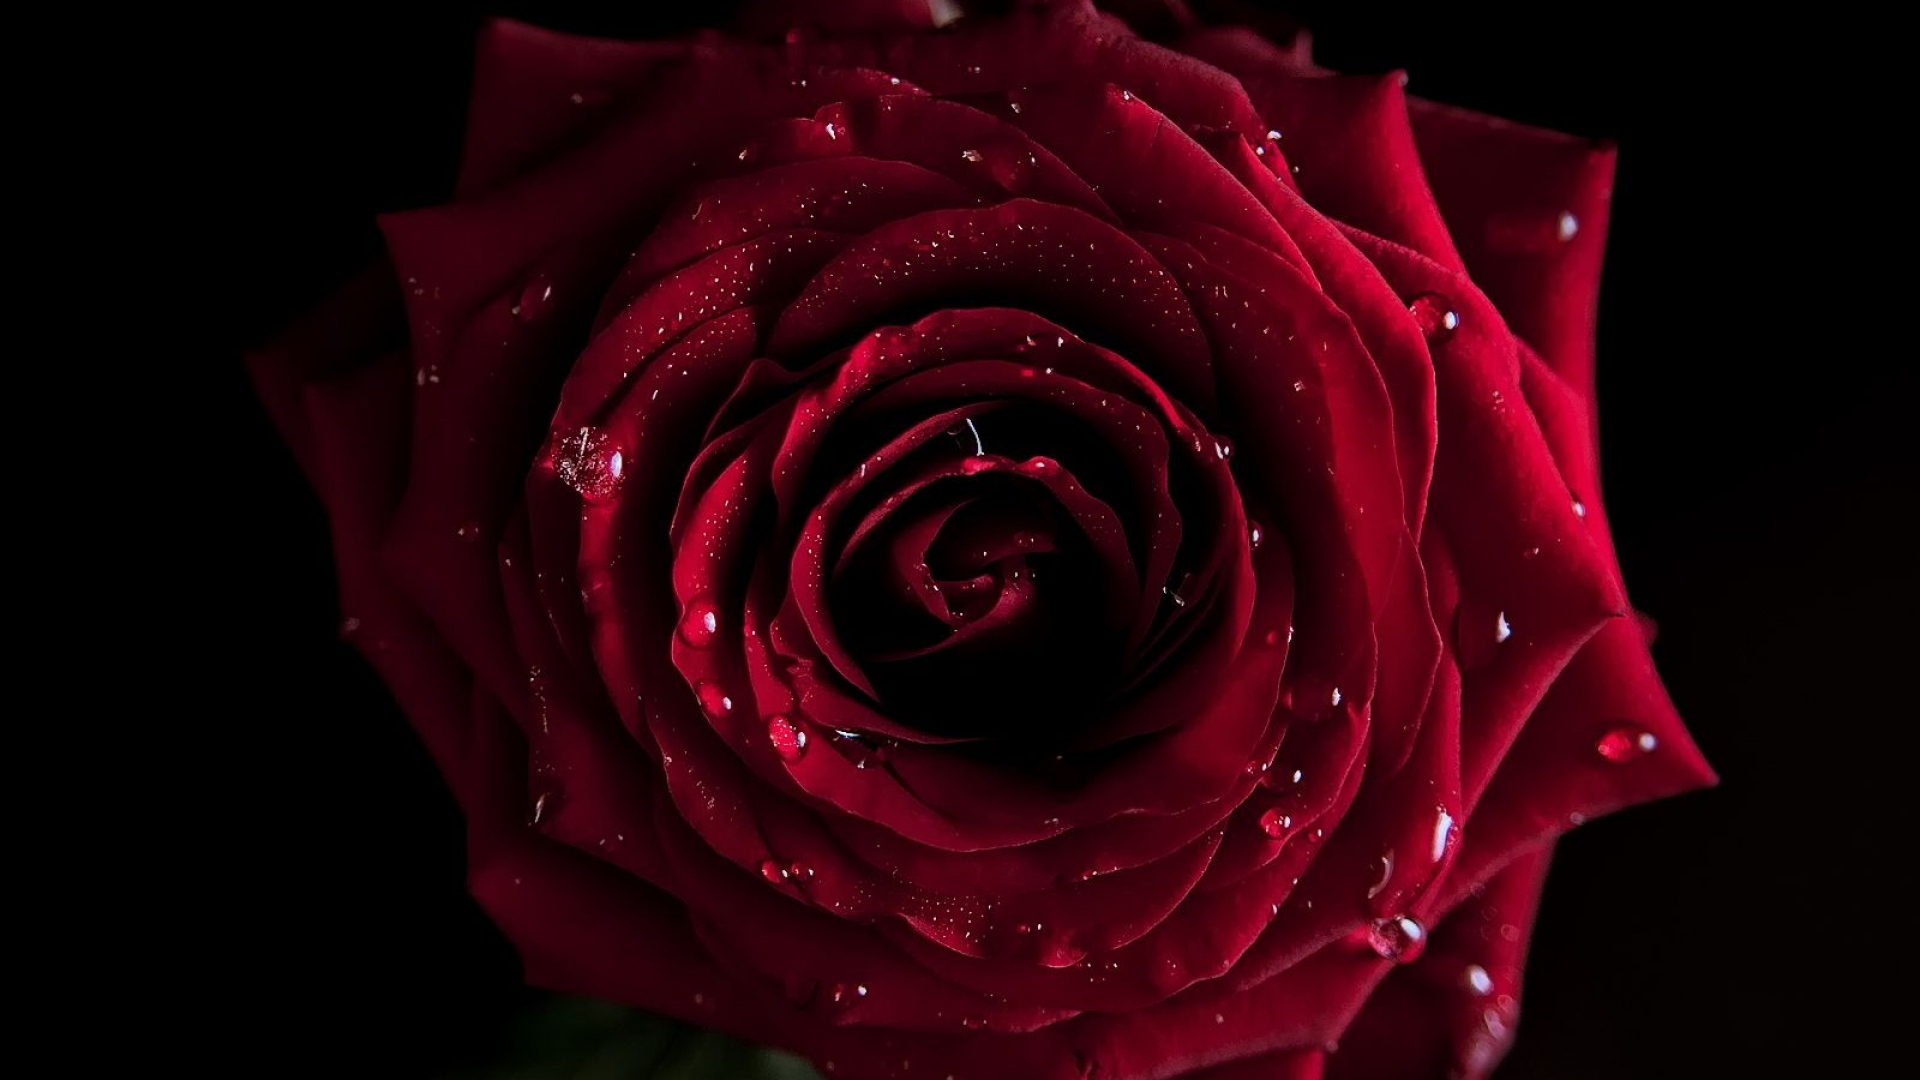 Red Rose Wallpaper Pictures Image